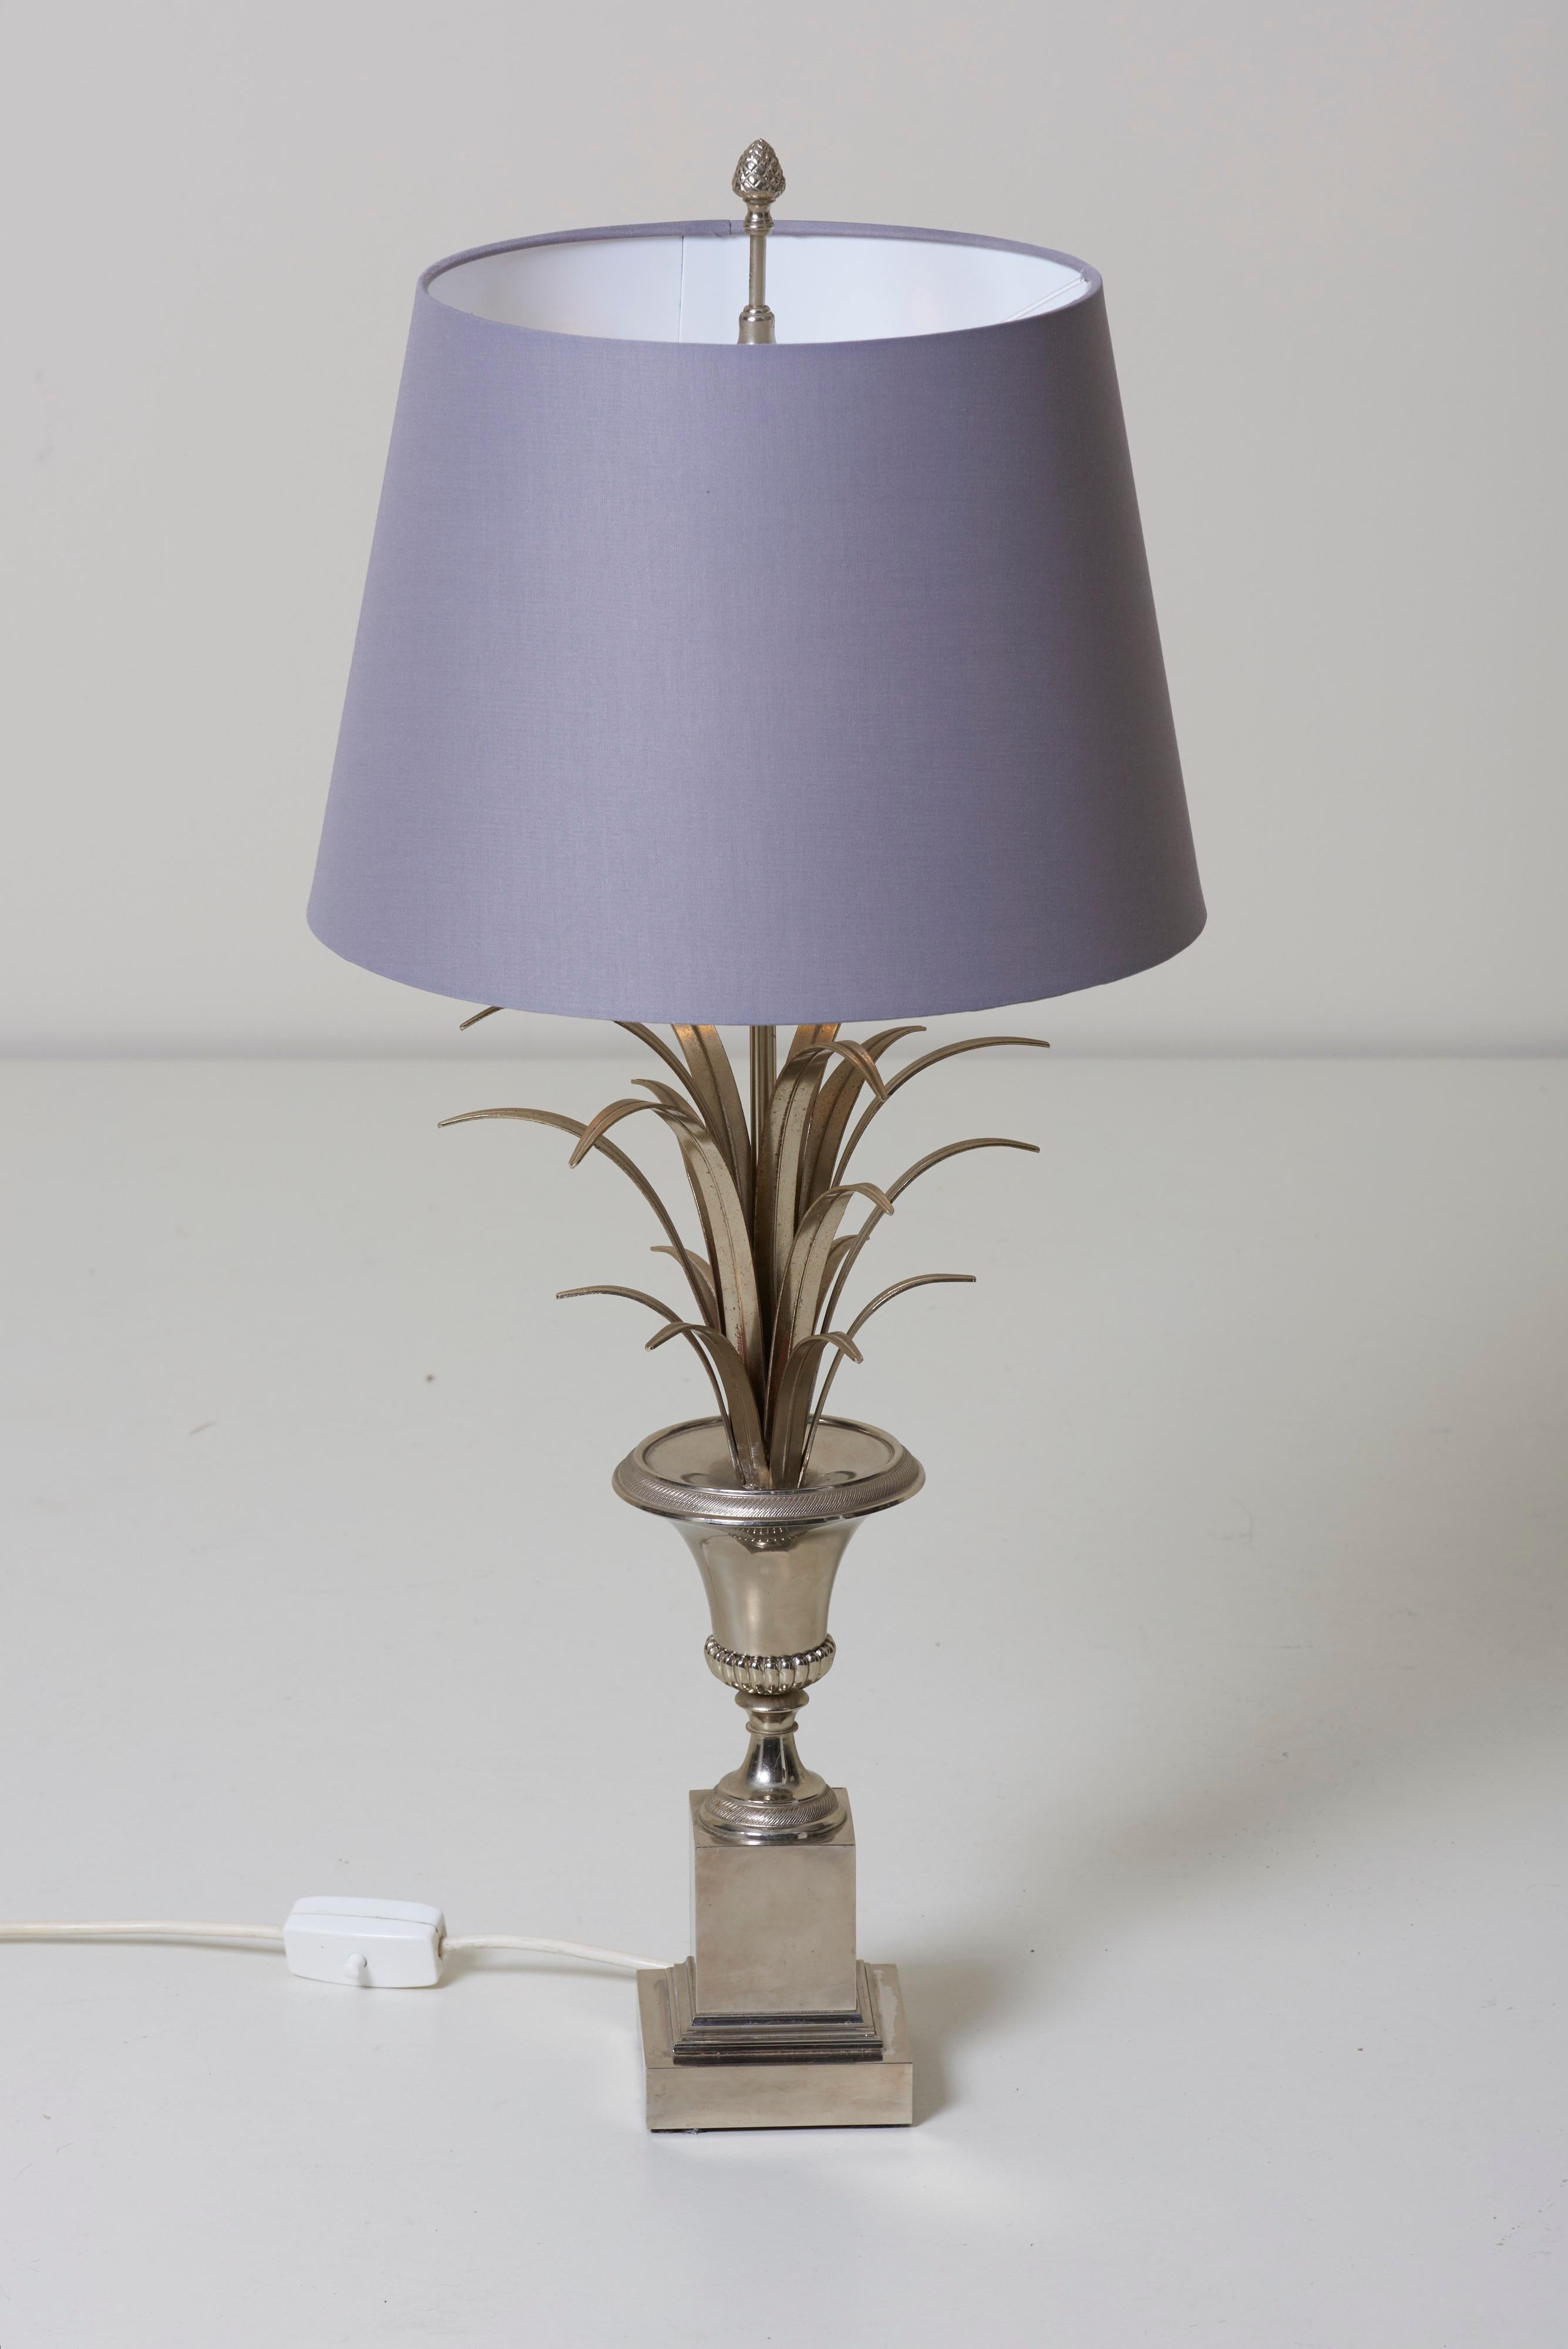 Wonderful, huge Maison Charles table lamp in chrome. The lamps are in a good vintage condition. The lampshade is only for purpose of illustration and doesn’t belong to the lamp.